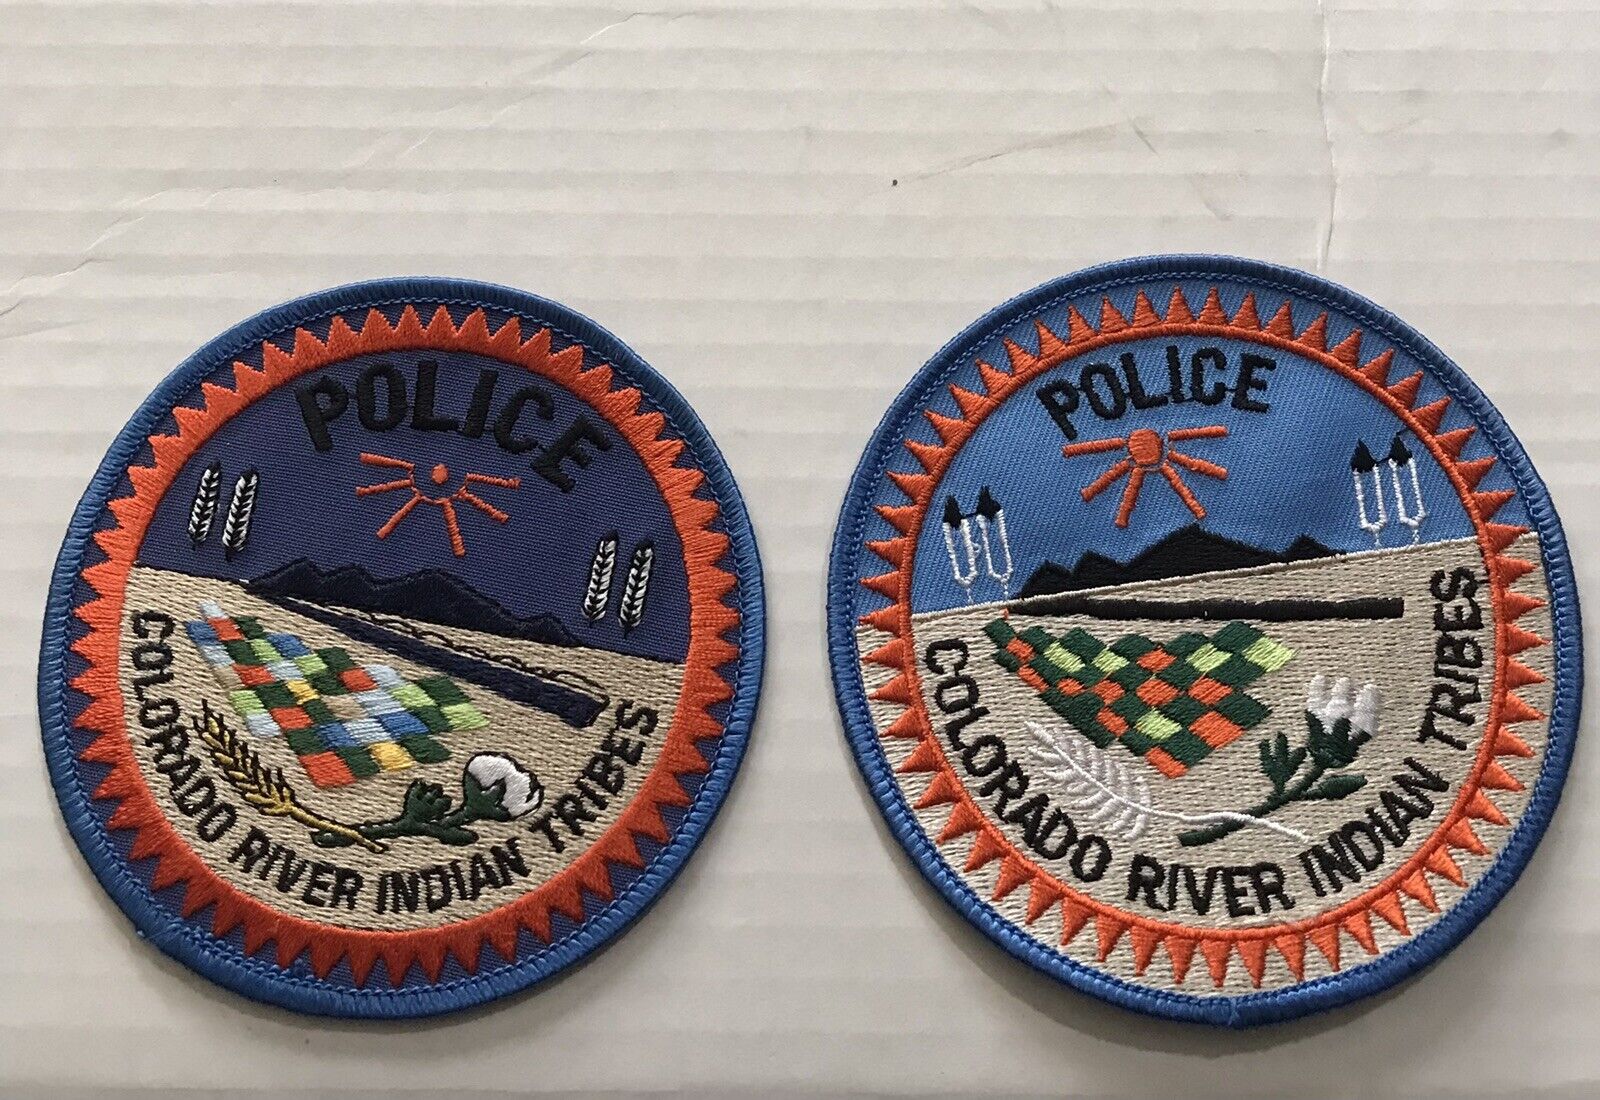 Colorado River Indian Tribes Police Department Patches